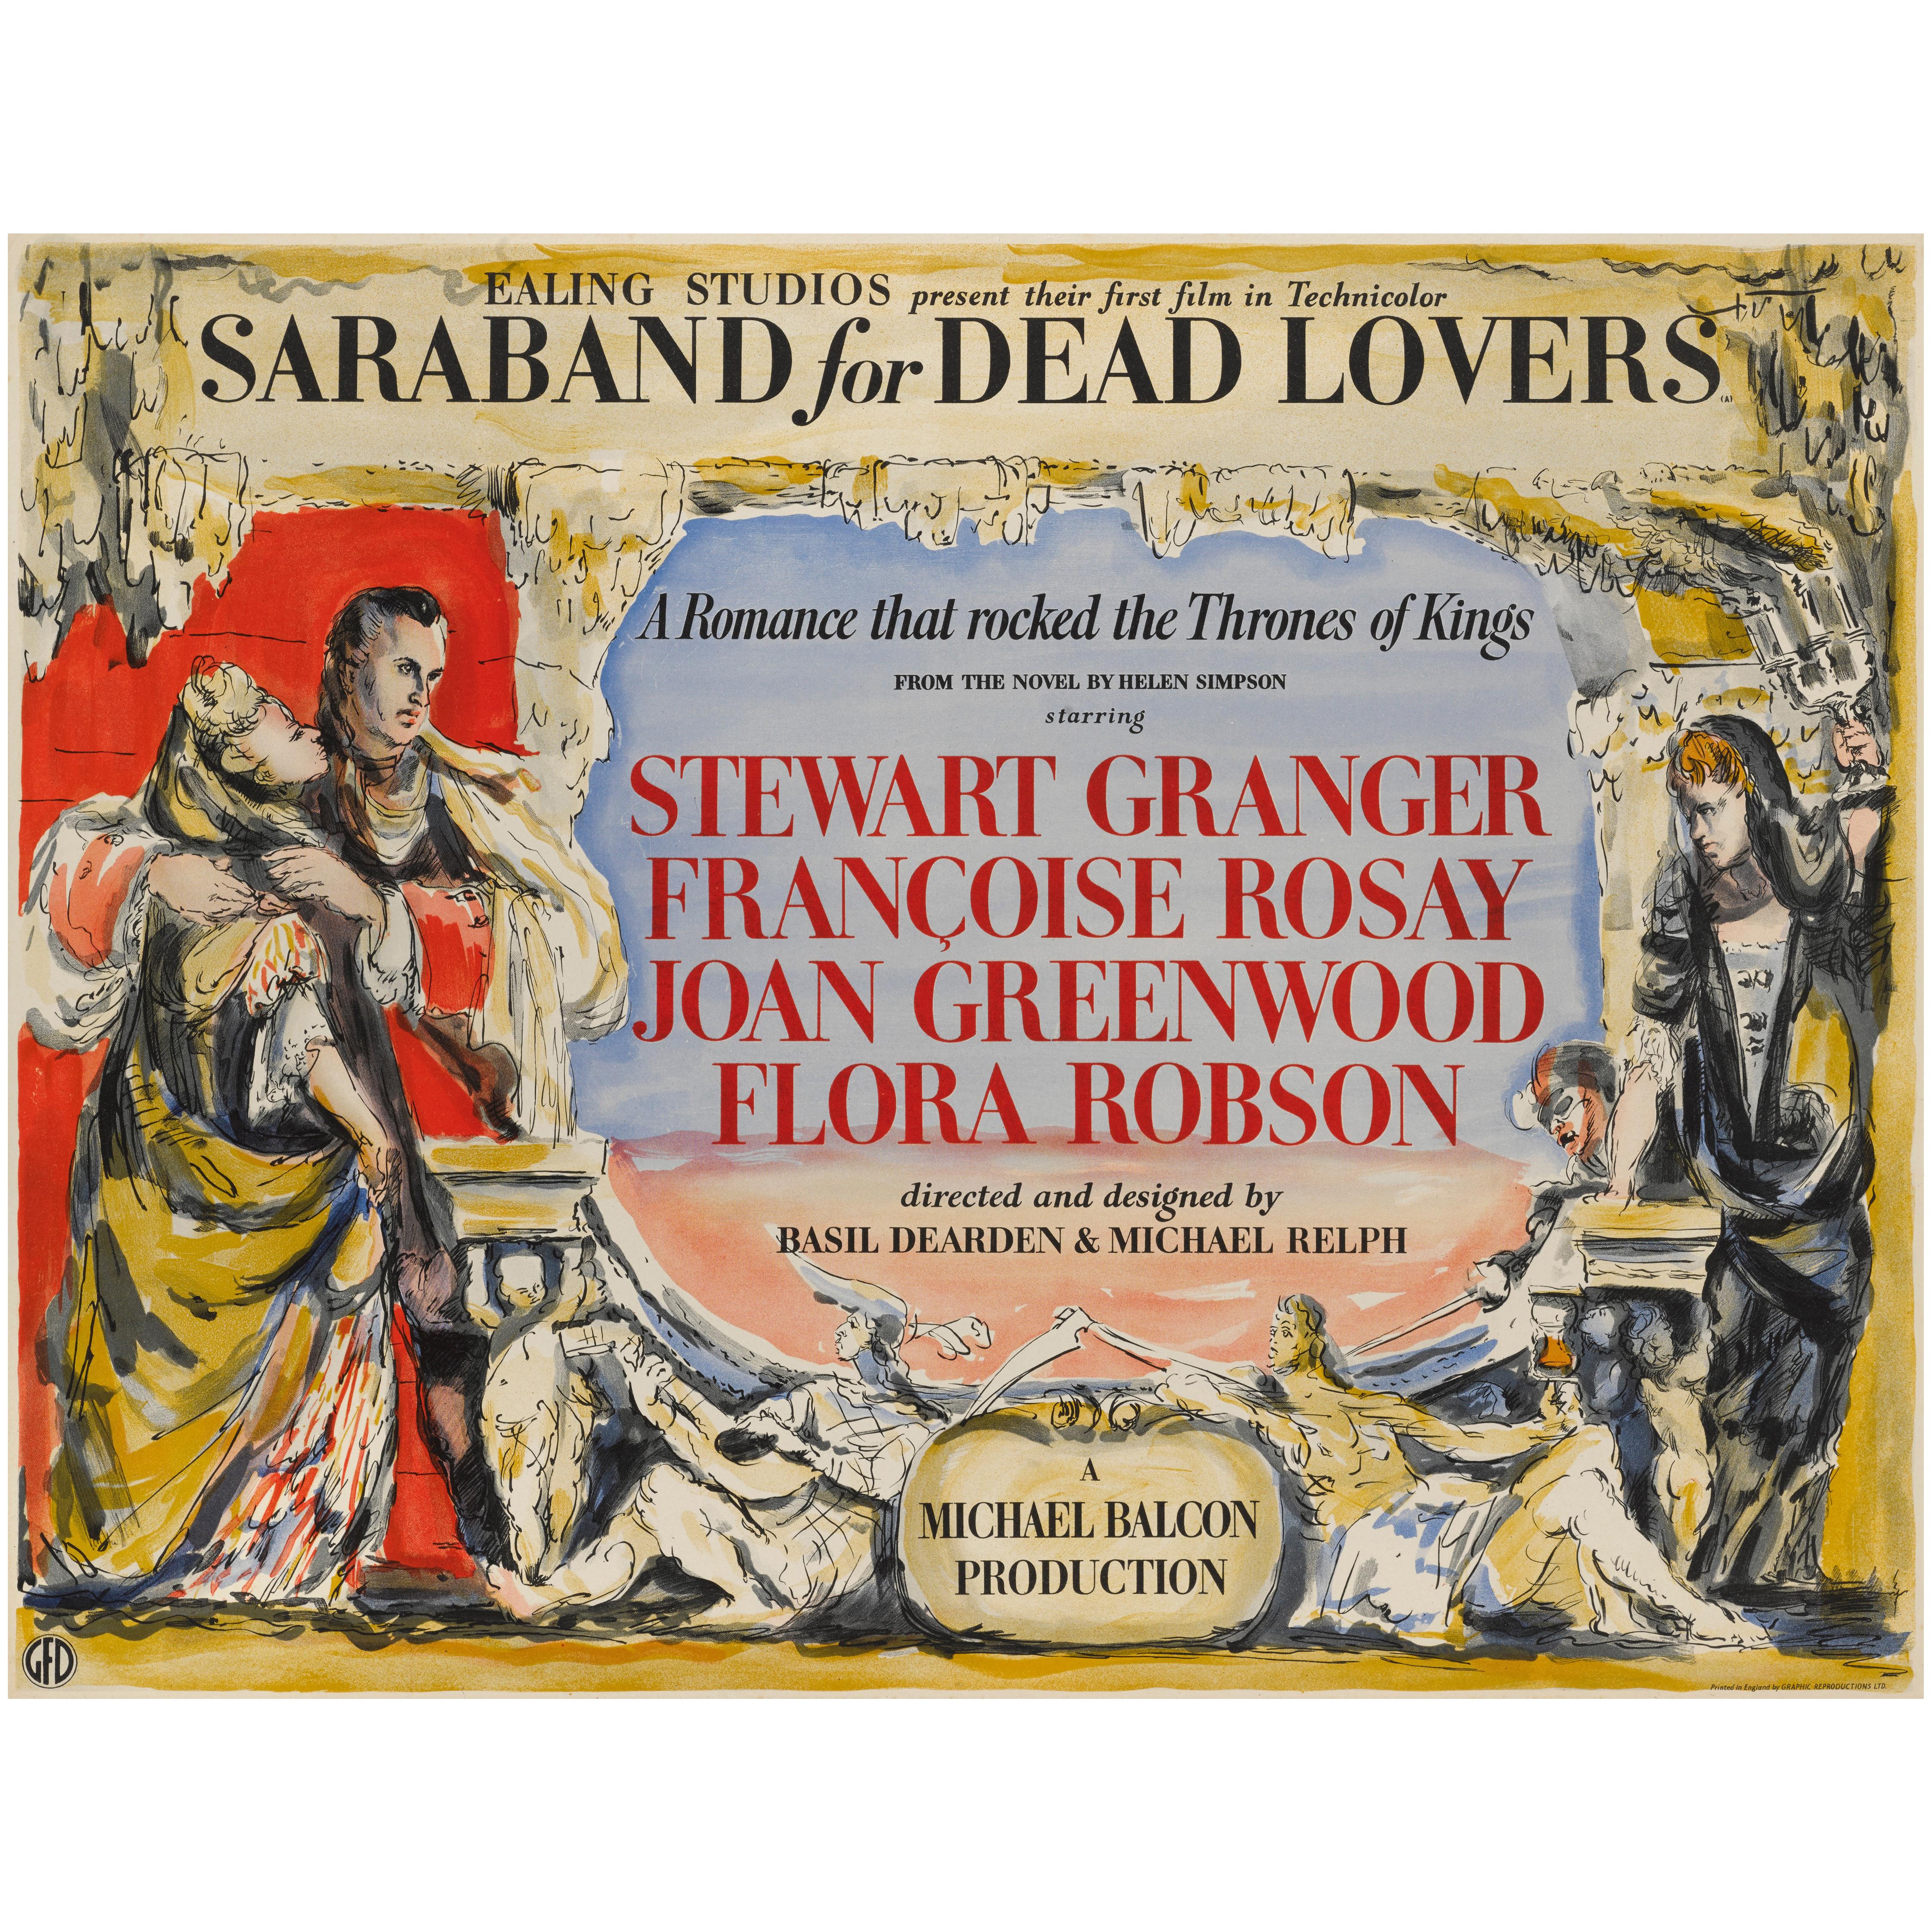 'Saraband for Dead Lovers' Original British Movie Poster For Sale